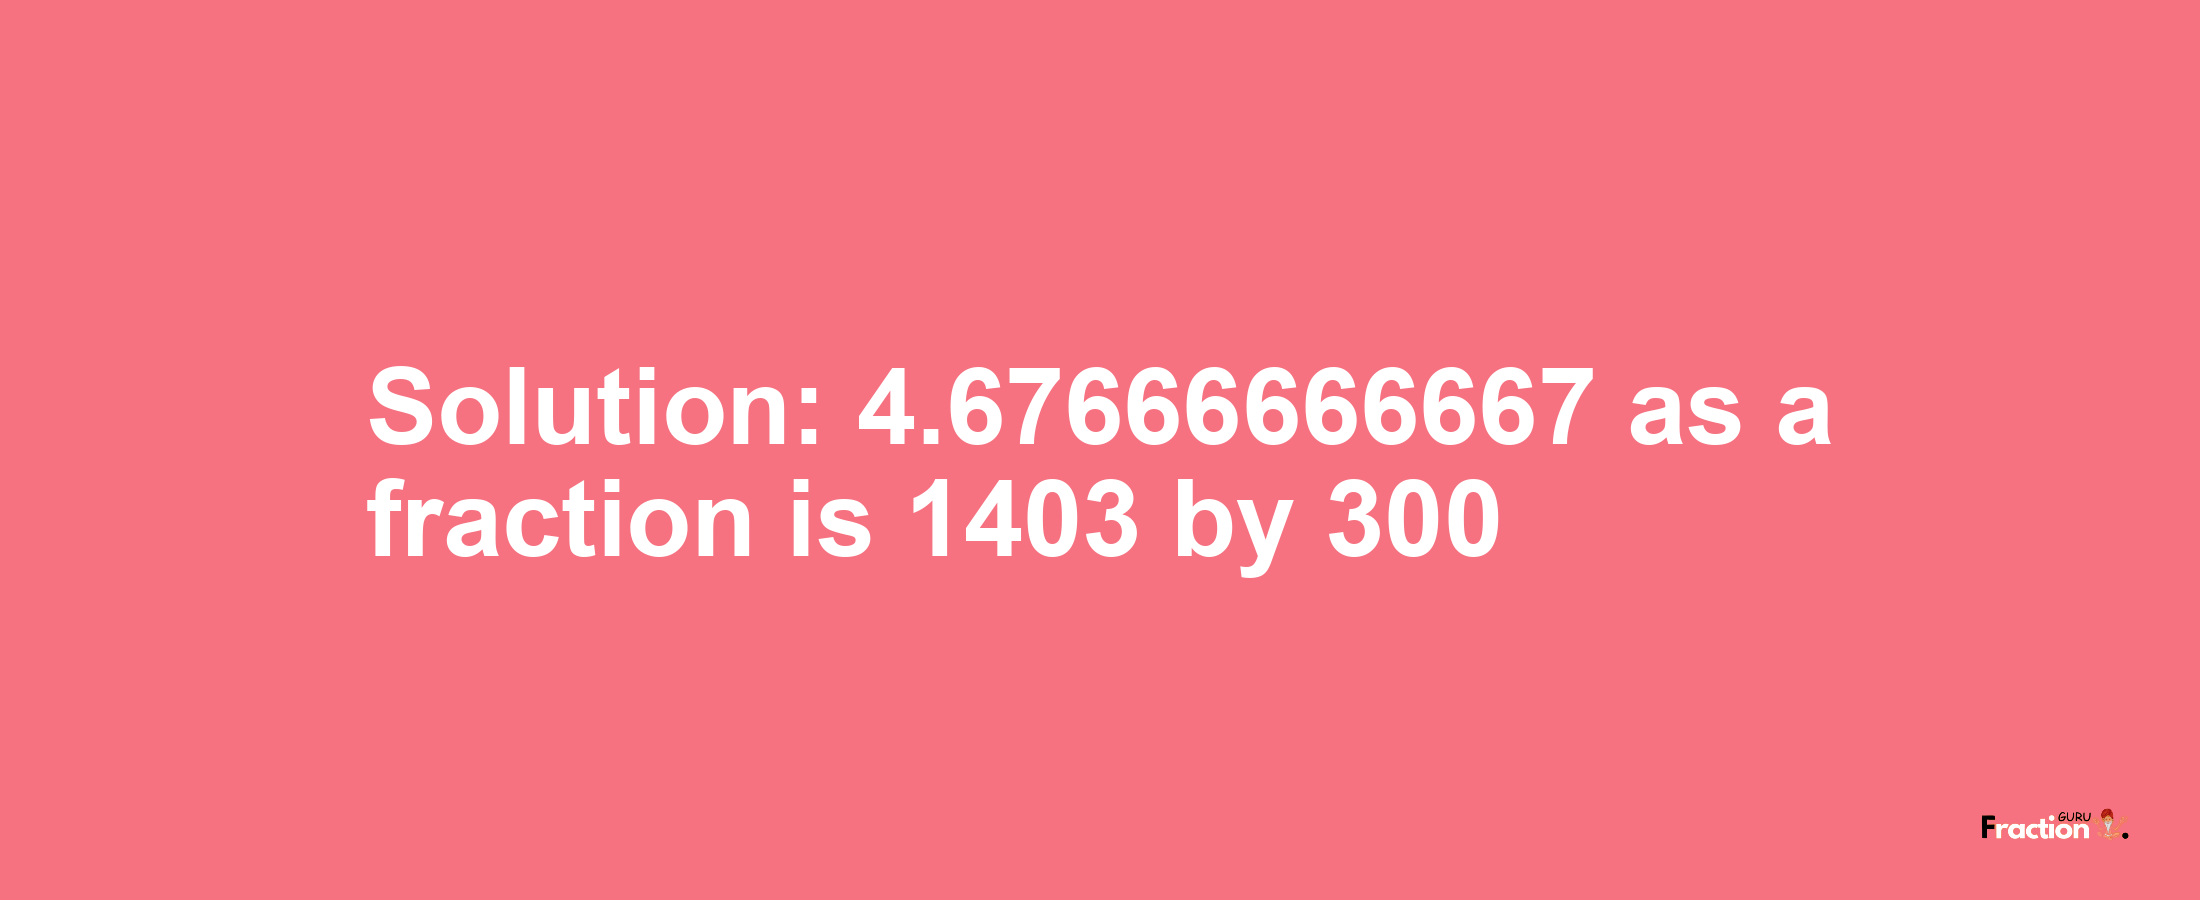 Solution:4.67666666667 as a fraction is 1403/300